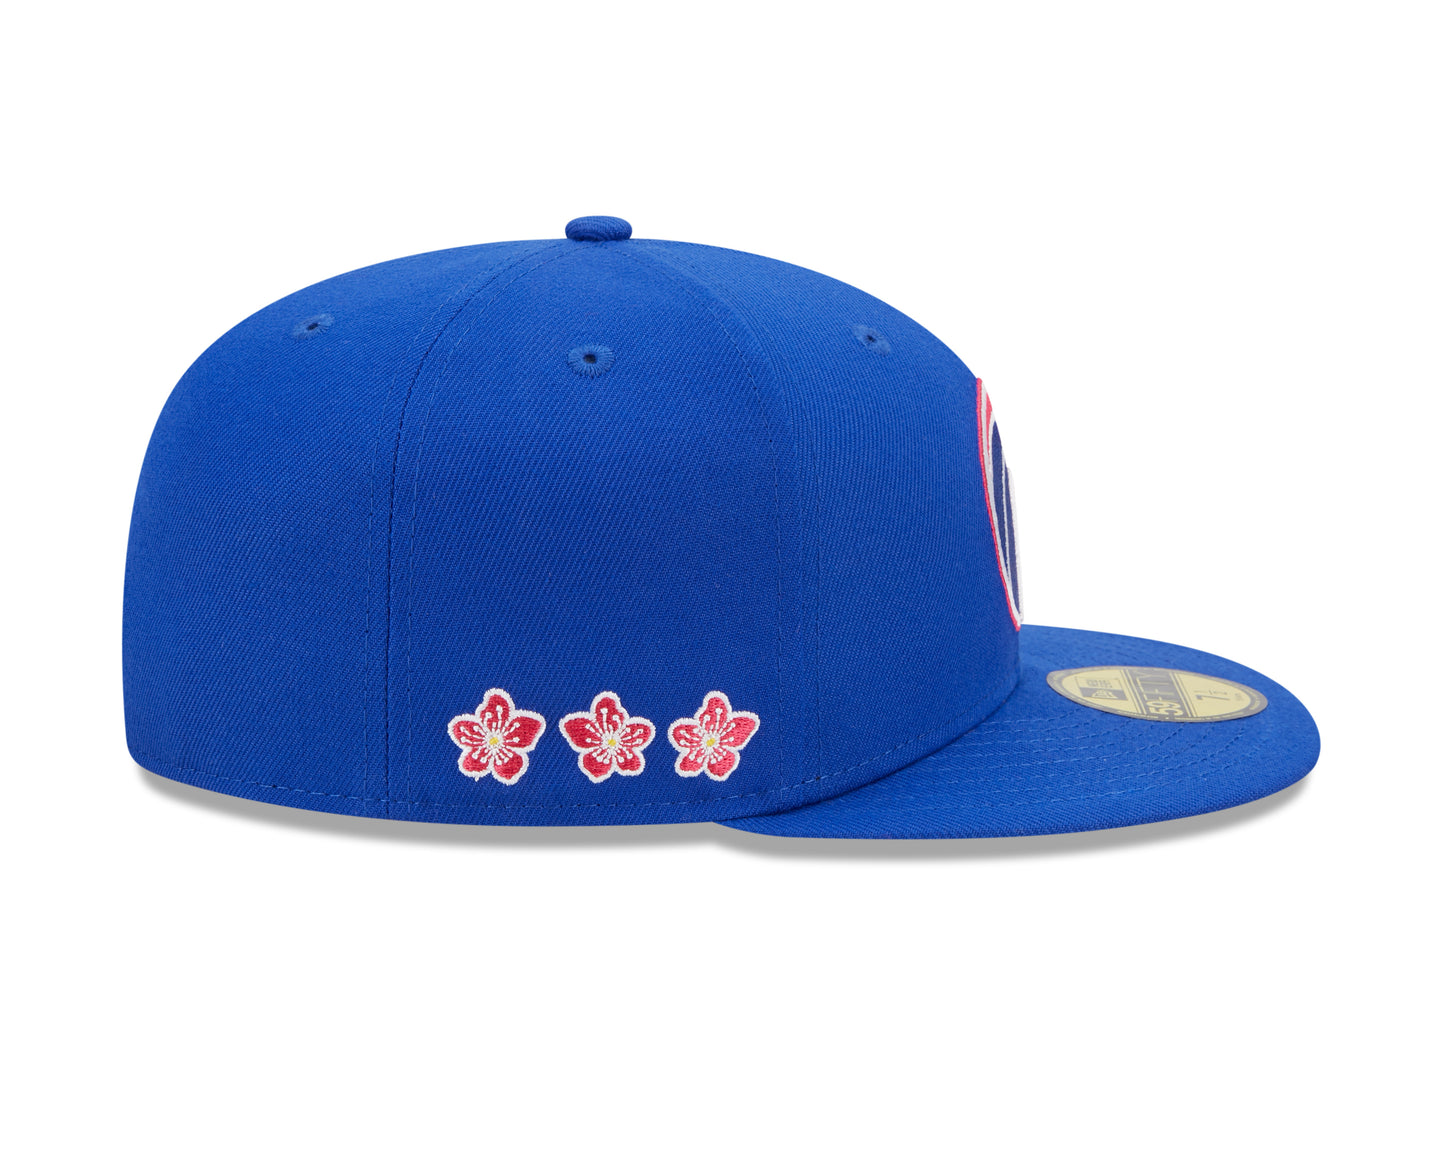 Washington Wizards New Era Alternate City Edition 59FIFTY Fitted Hat - Blue